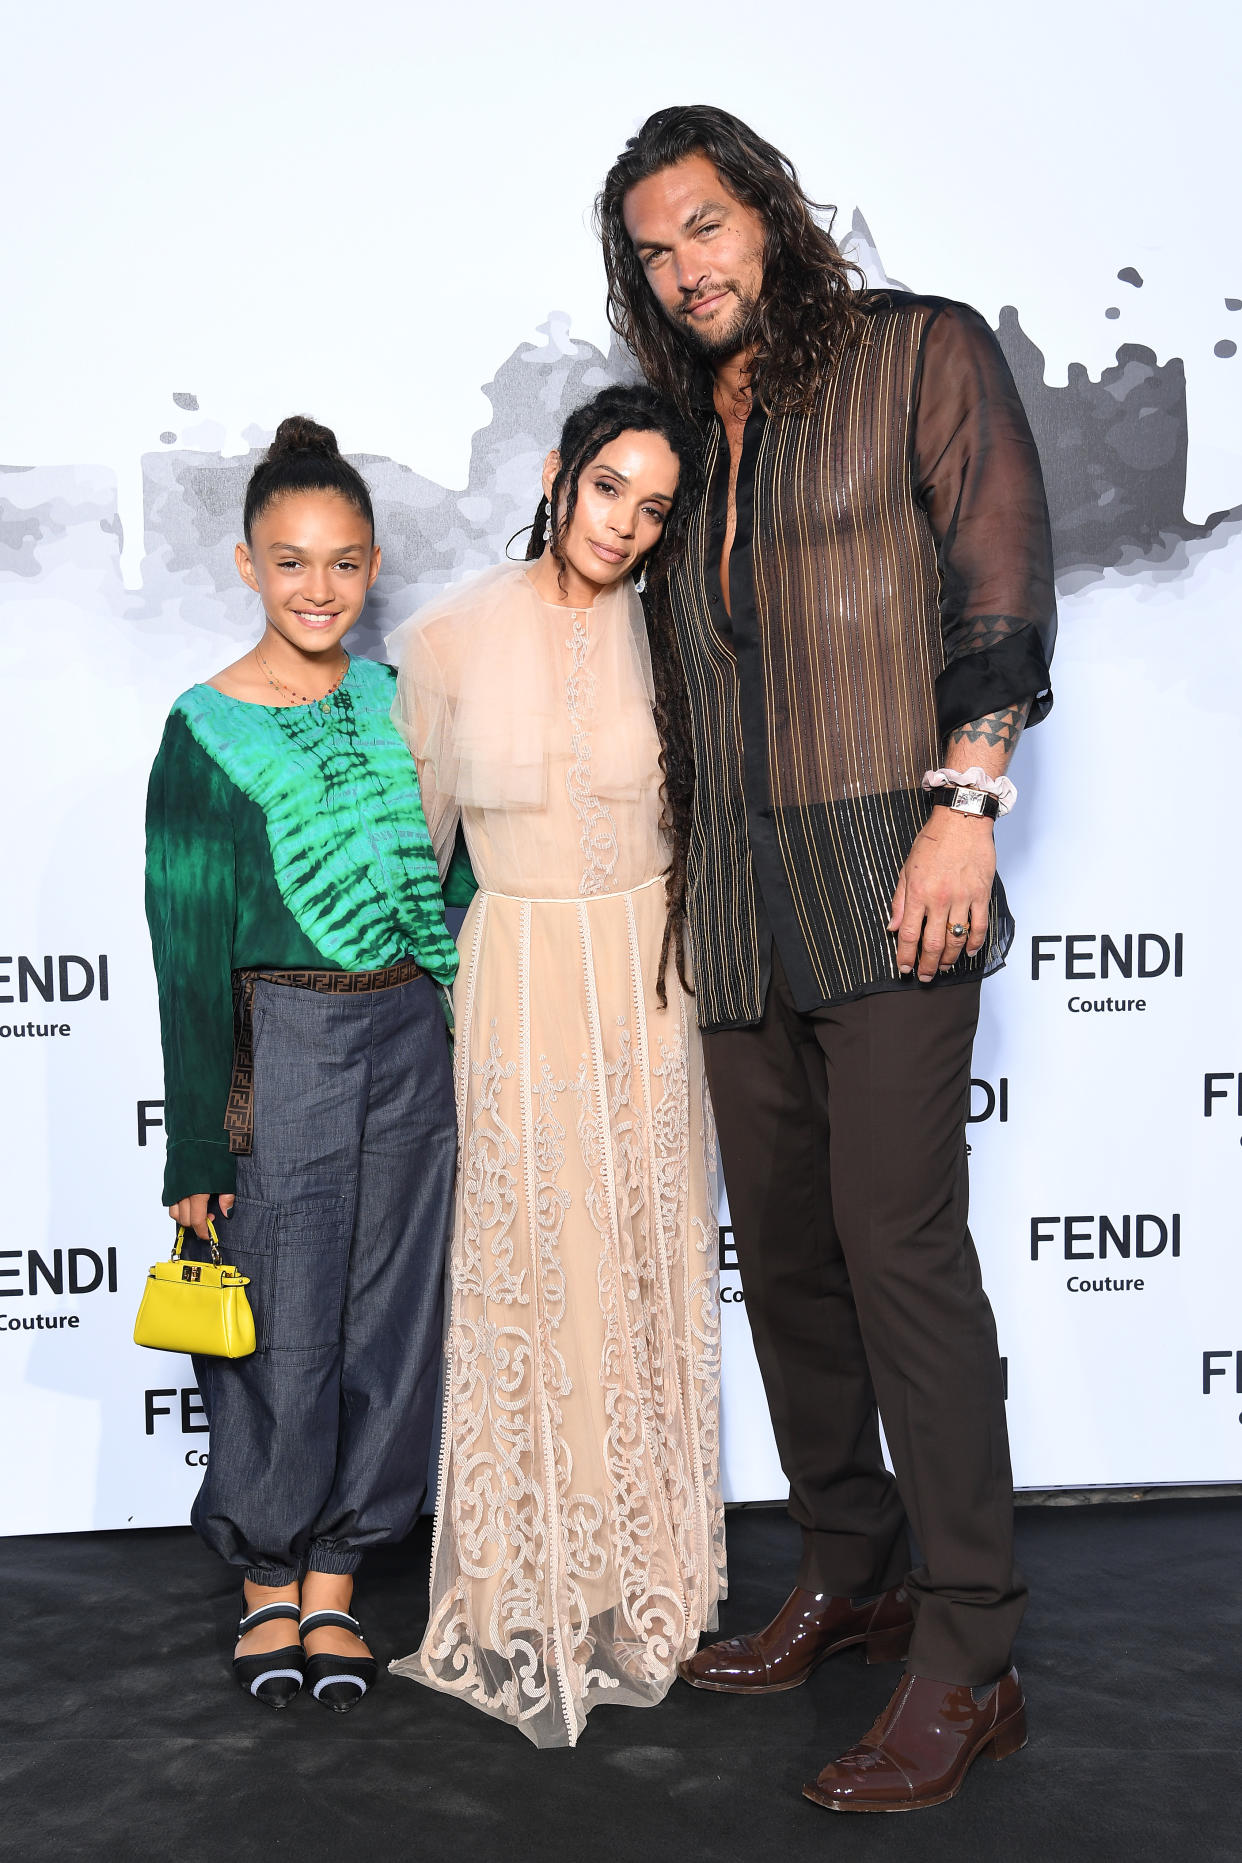 ROME, ITALY - JULY 04:  Lola Iolani Momoa, Lilakoi Moon and Jason Momoa attend the Cocktail at Fendi Couture Fall Winter 2019/2020 on July 04, 2019 in Rome, Italy. (Photo by Daniele Venturelli/Daniele Venturelli/ Getty Images for Fendi)